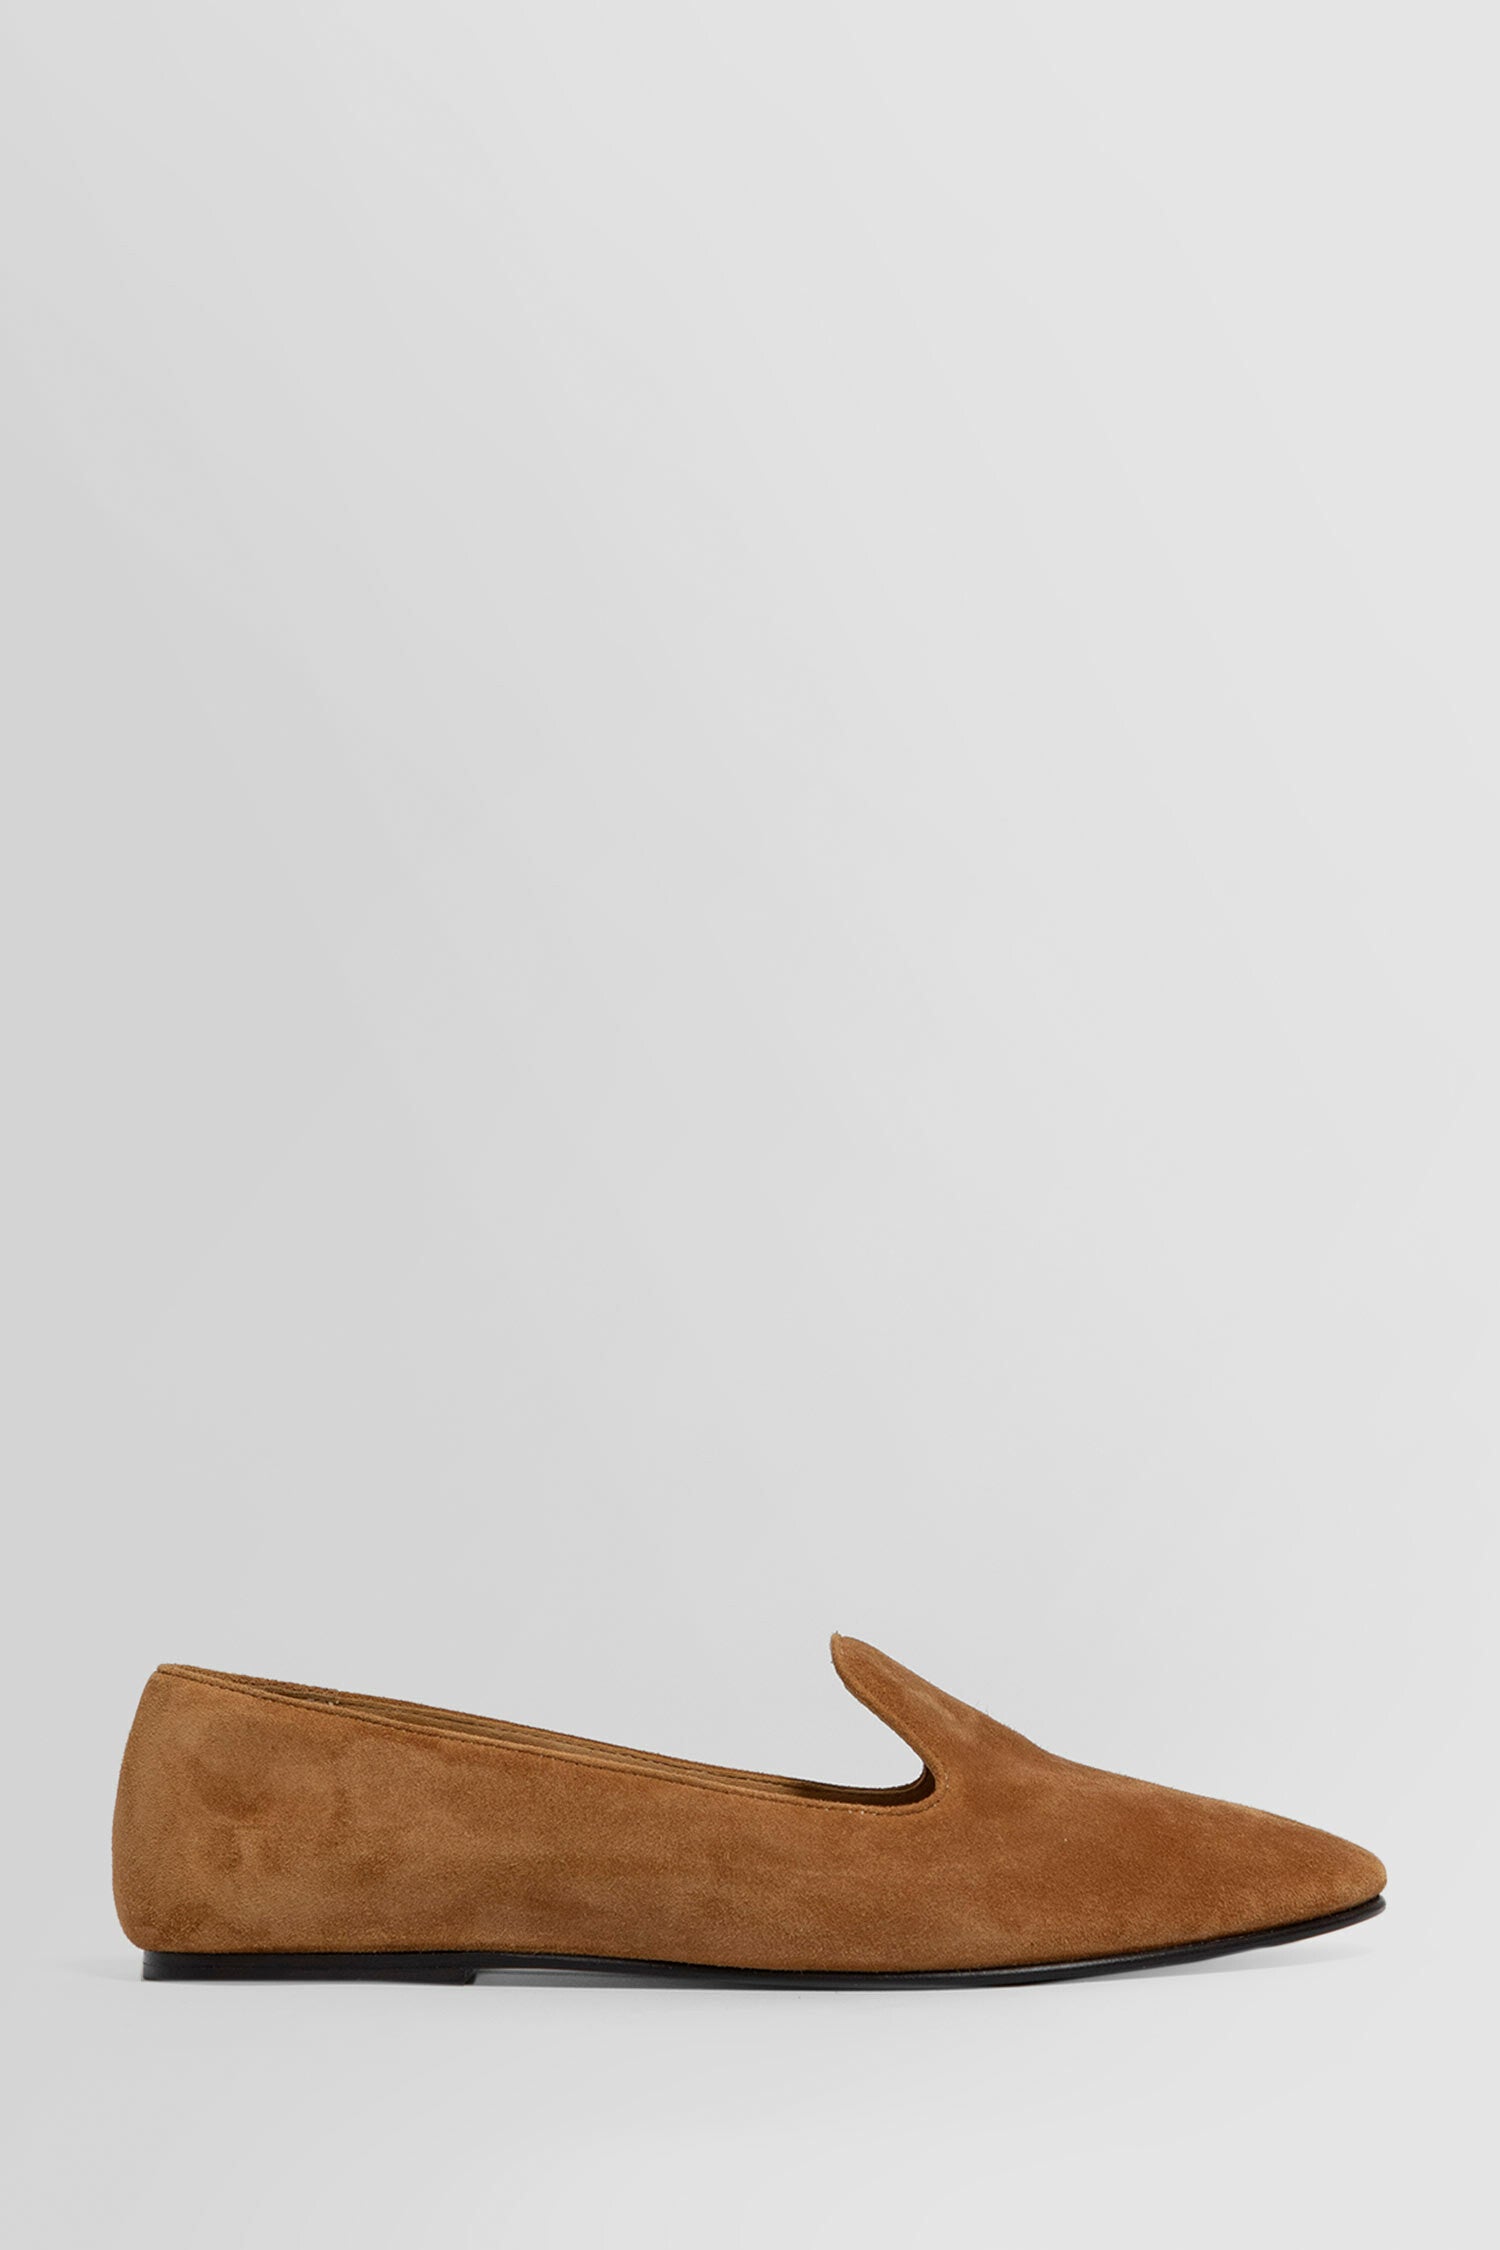 THE ROW WOMAN BROWN LOAFERS & FLATS